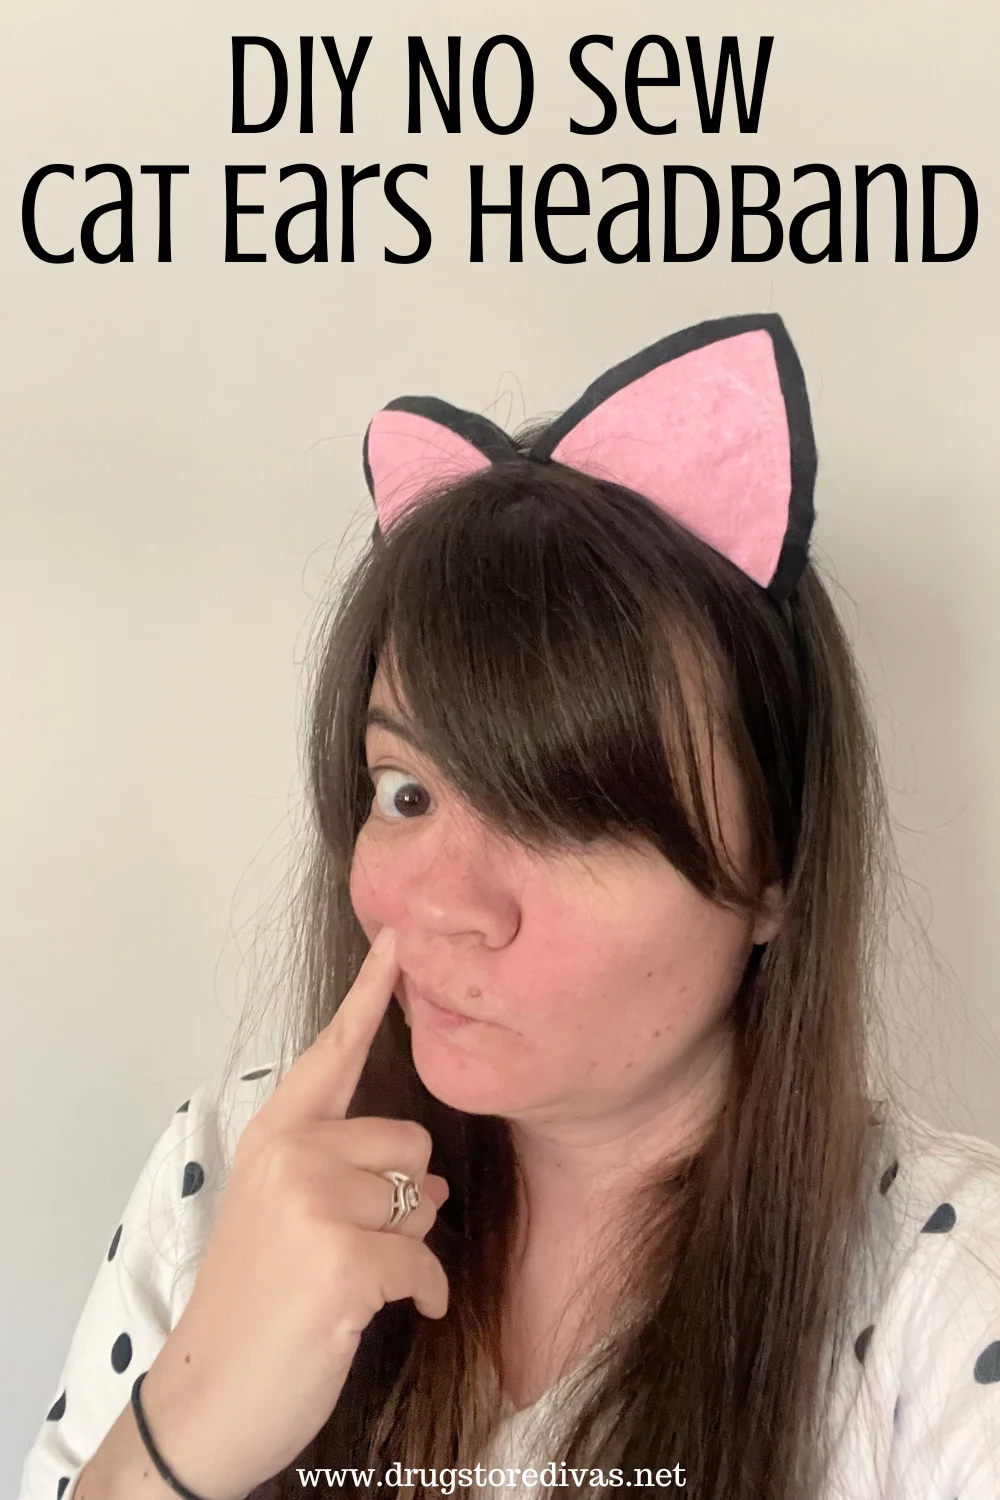 A woman in a white with black polka dot shirt wearing pink and black cat ears with the words 